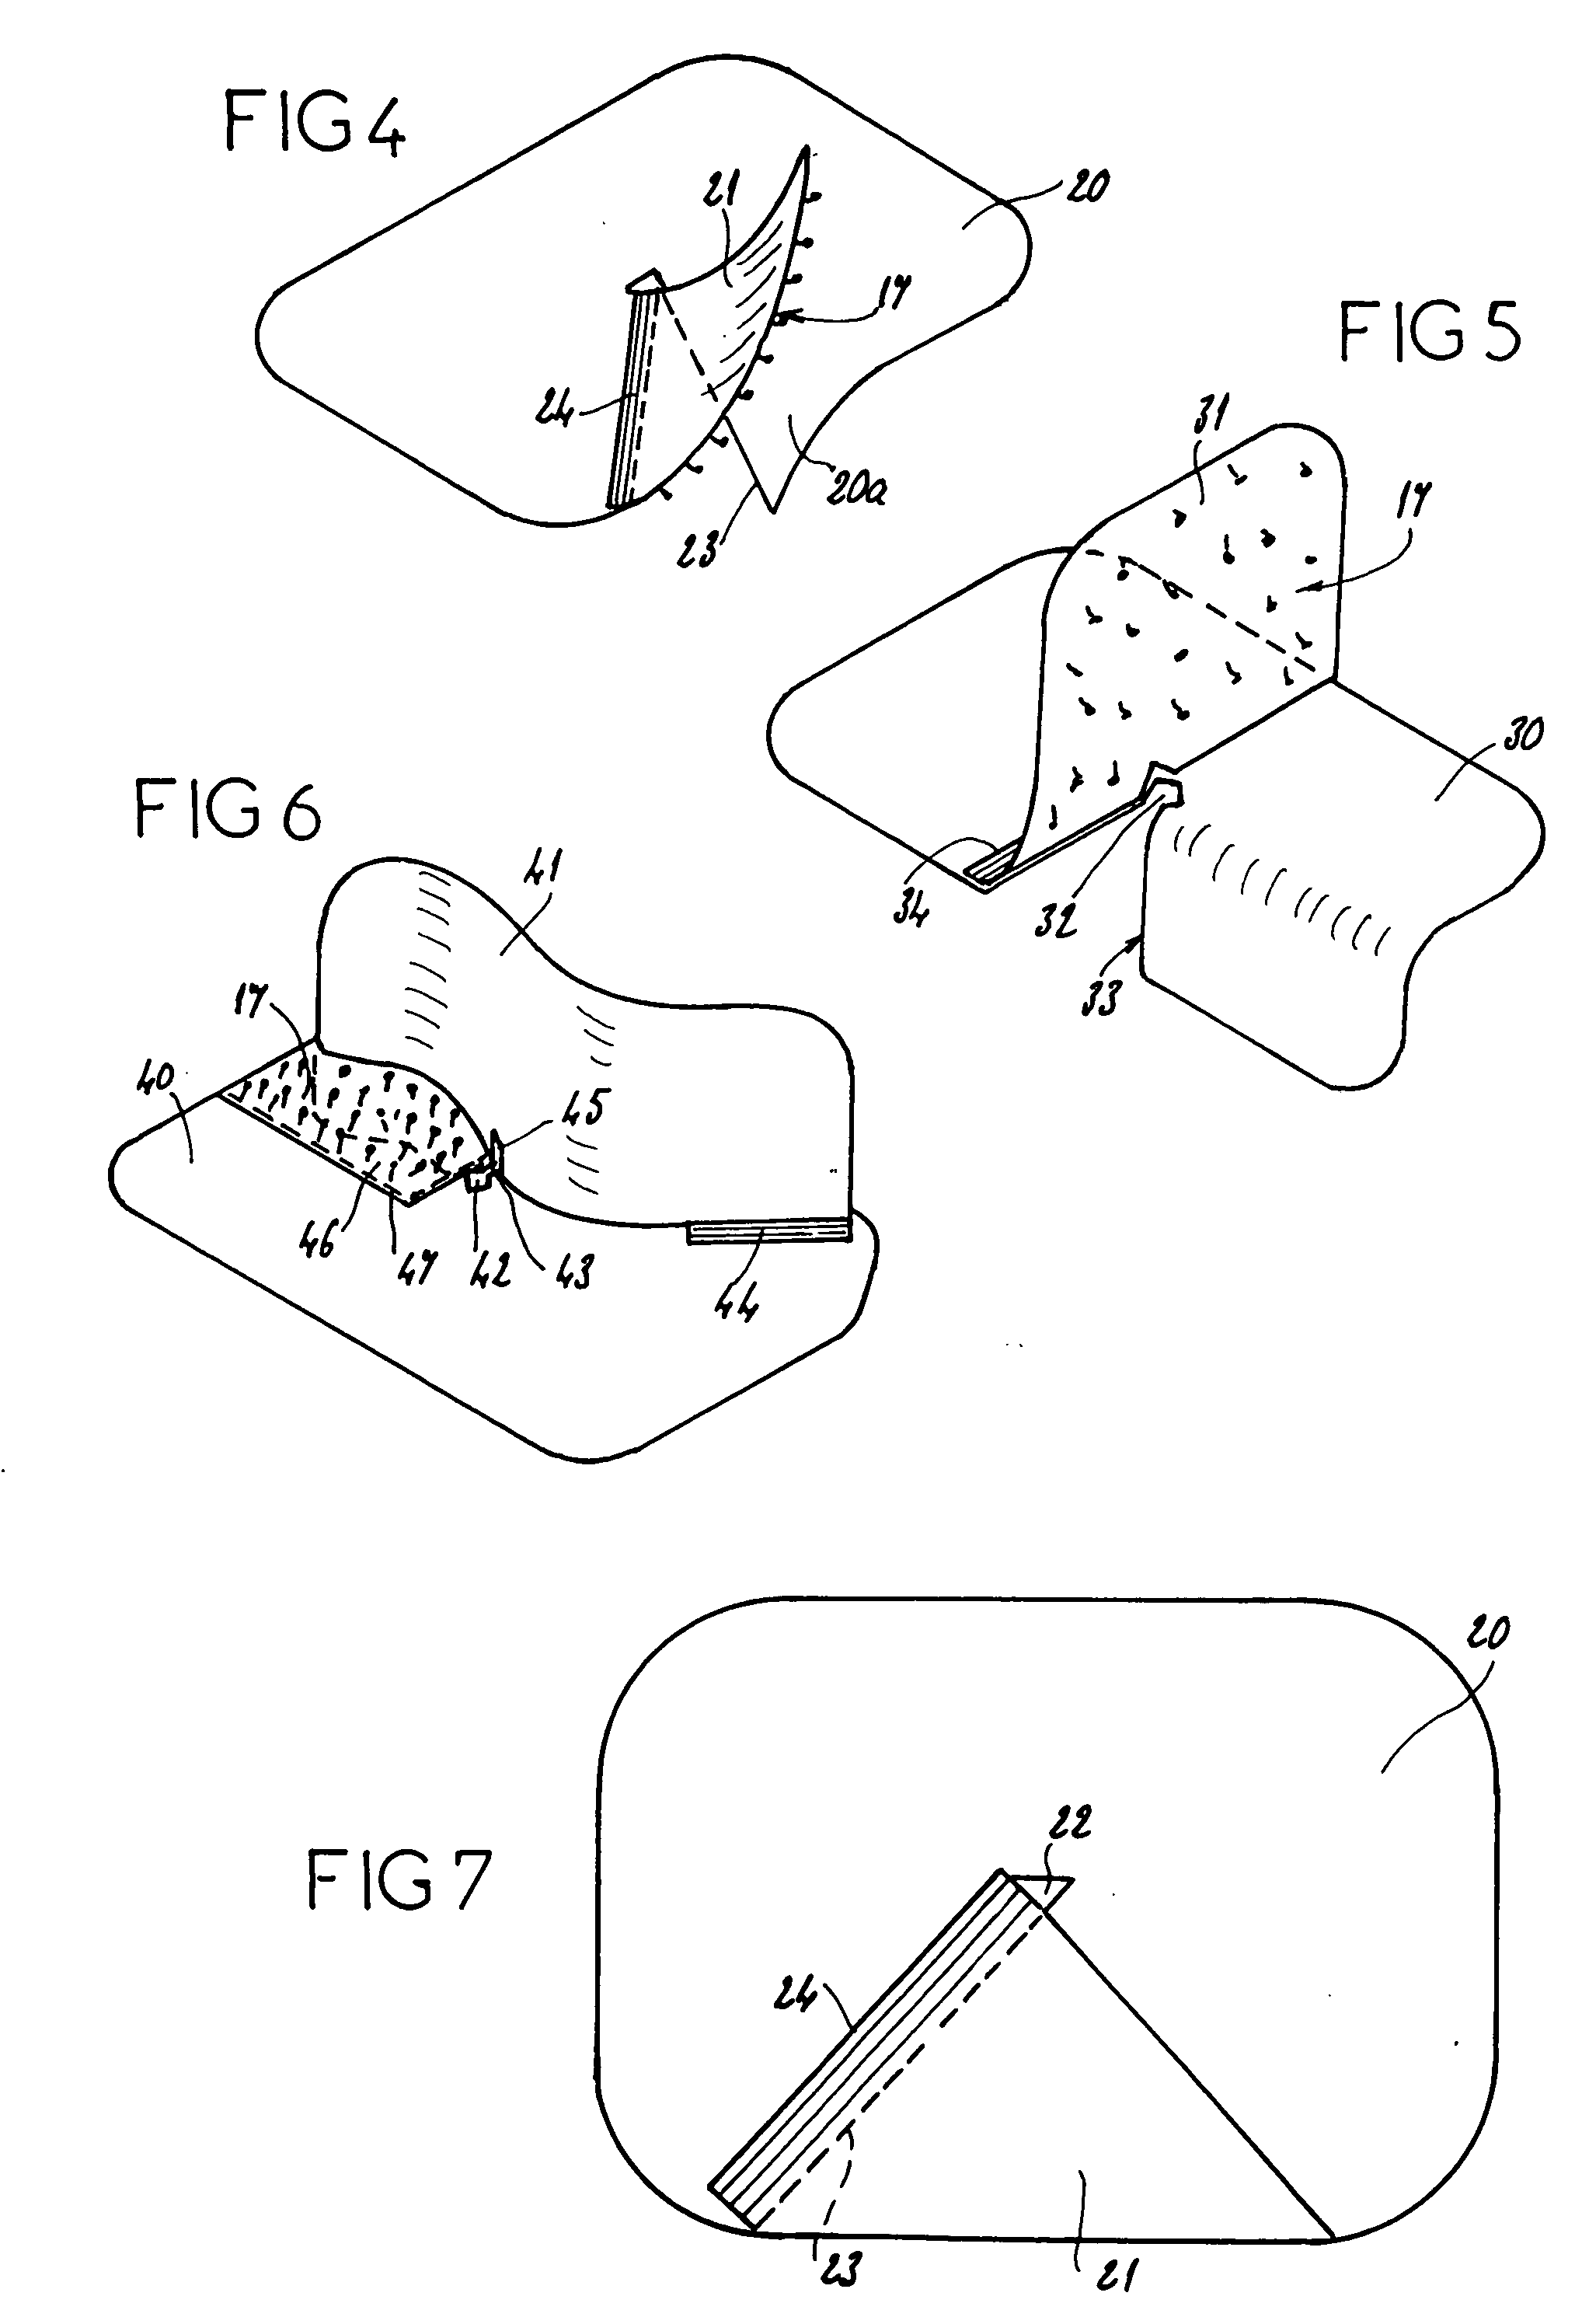 Adhering prosthetic knitting fabric, method for making same and reinforcement implant for treating parietal deficiencies